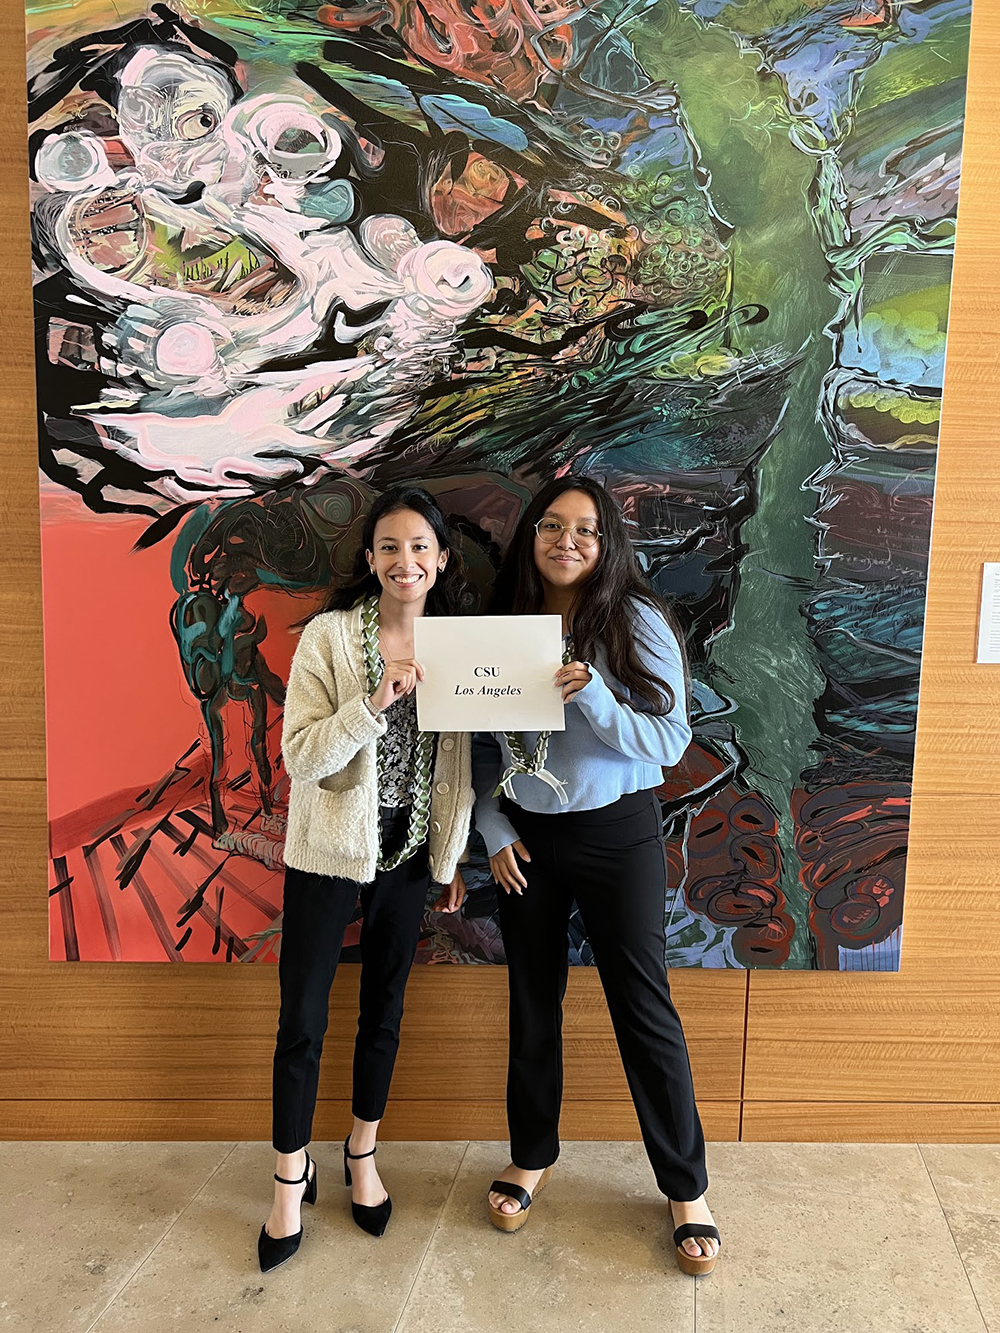 Carina Gregorio and Brenda Romero, who studied at CSU Los Angeles, were part of the first cohort of U-Grow interns at Cedars-Sinai.